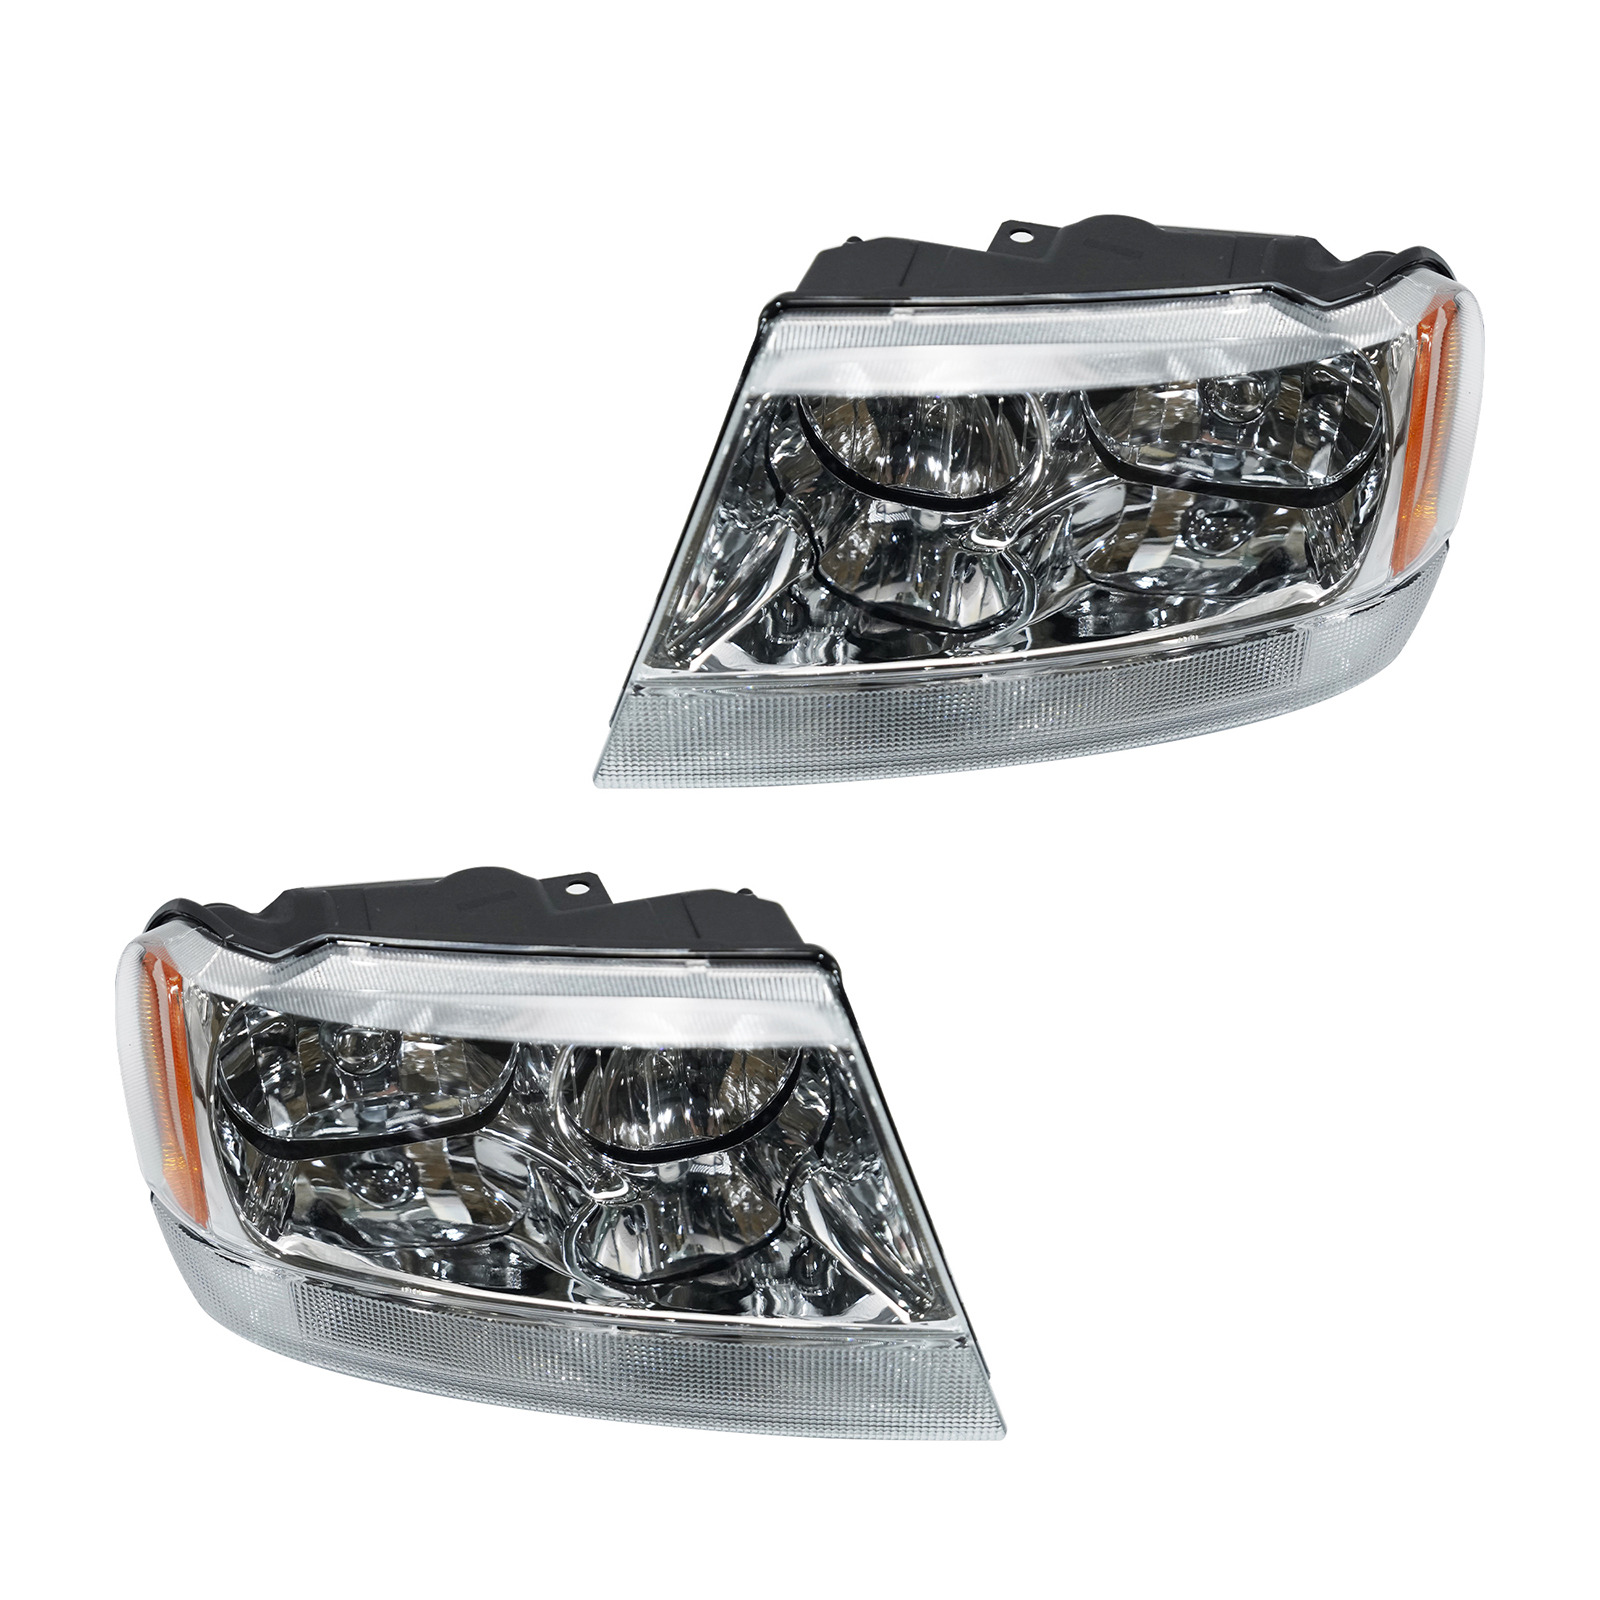 Headlights Assembly For 99-04 Jeep Grand Cherokee Chrome Halogen Headlamps Pair